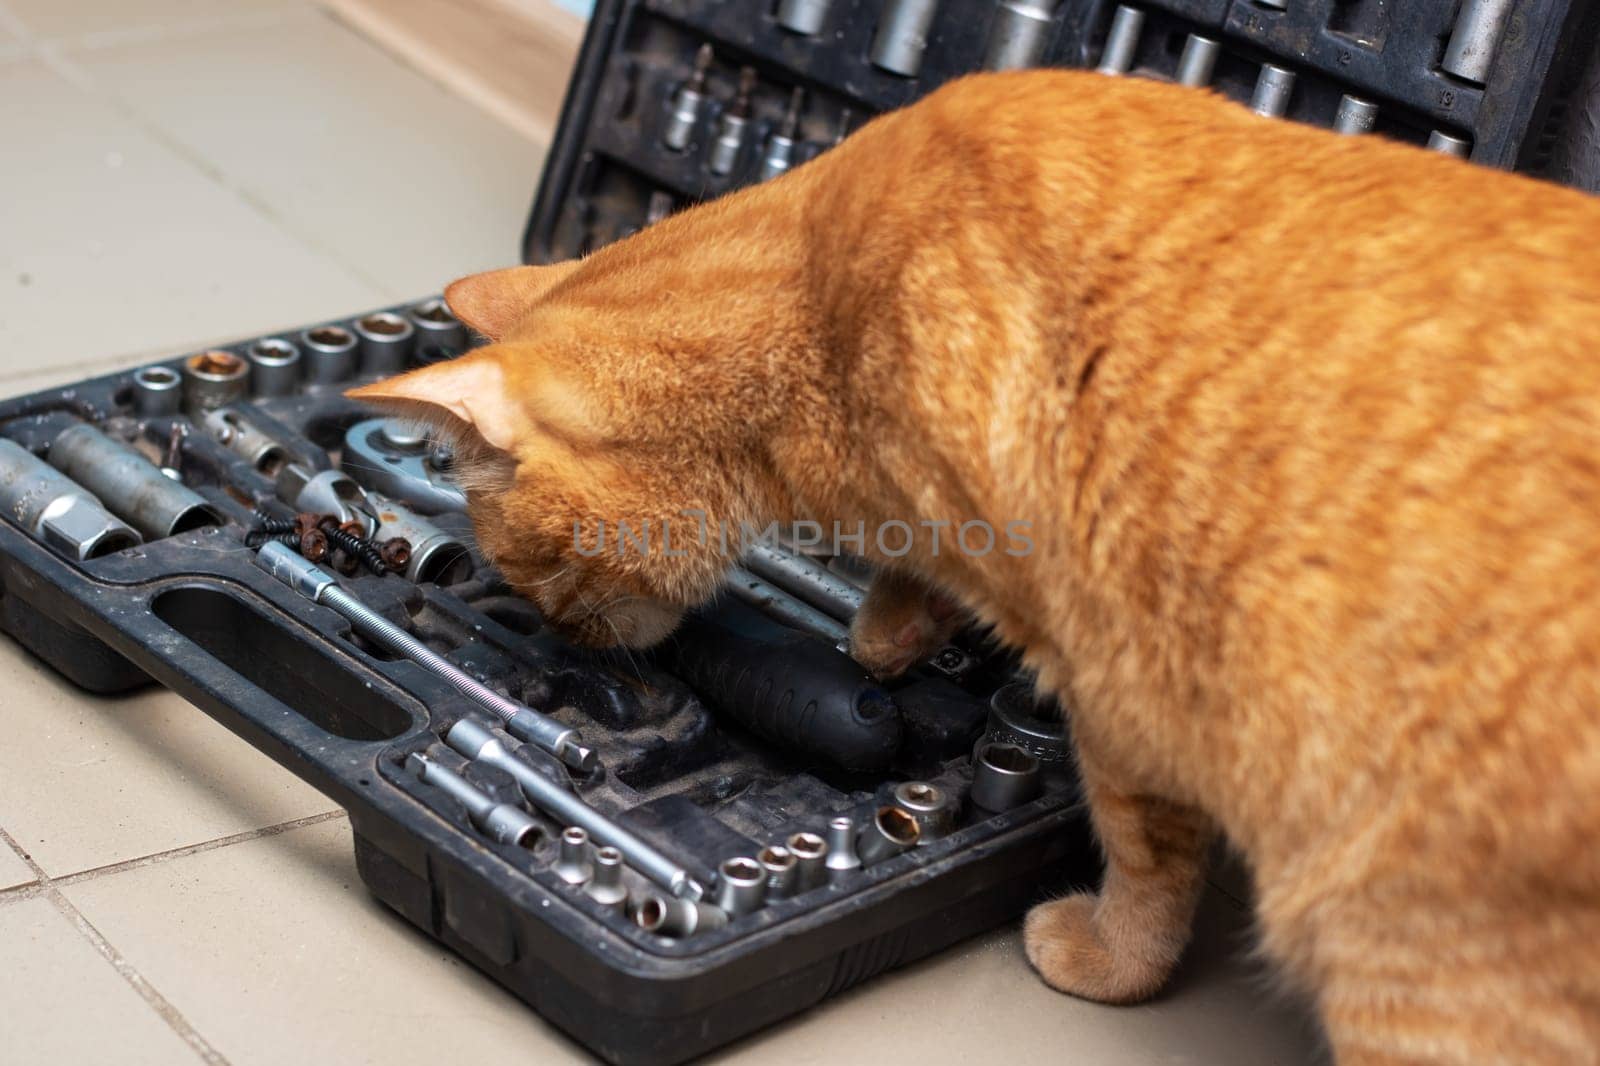 Feline using whiskers to explore gadgets in toolbox close up